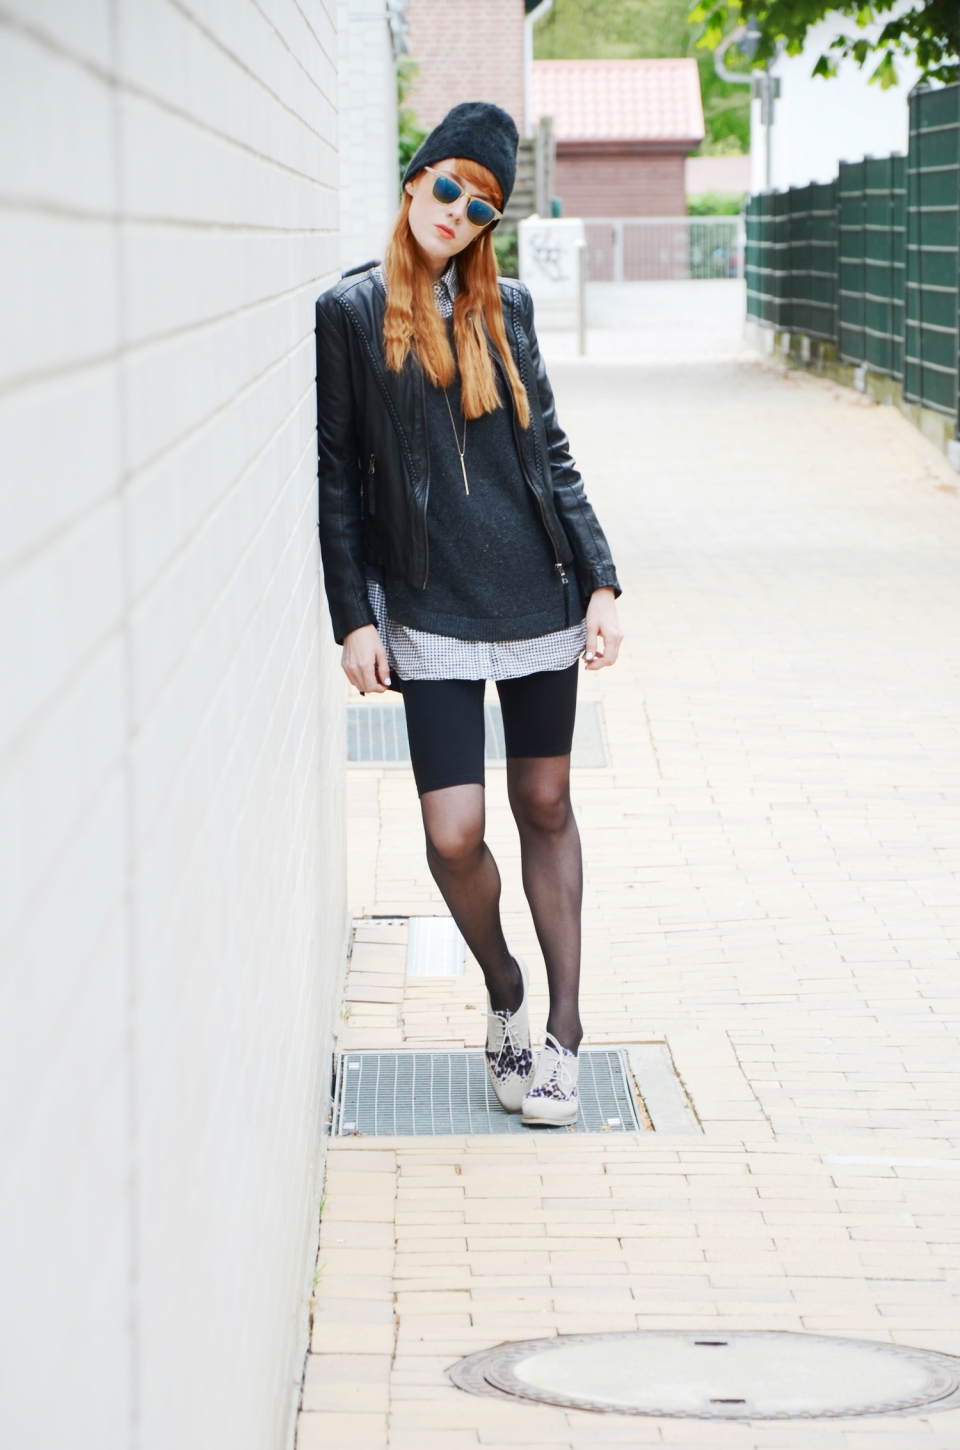 timmendorf_outfit 1_1